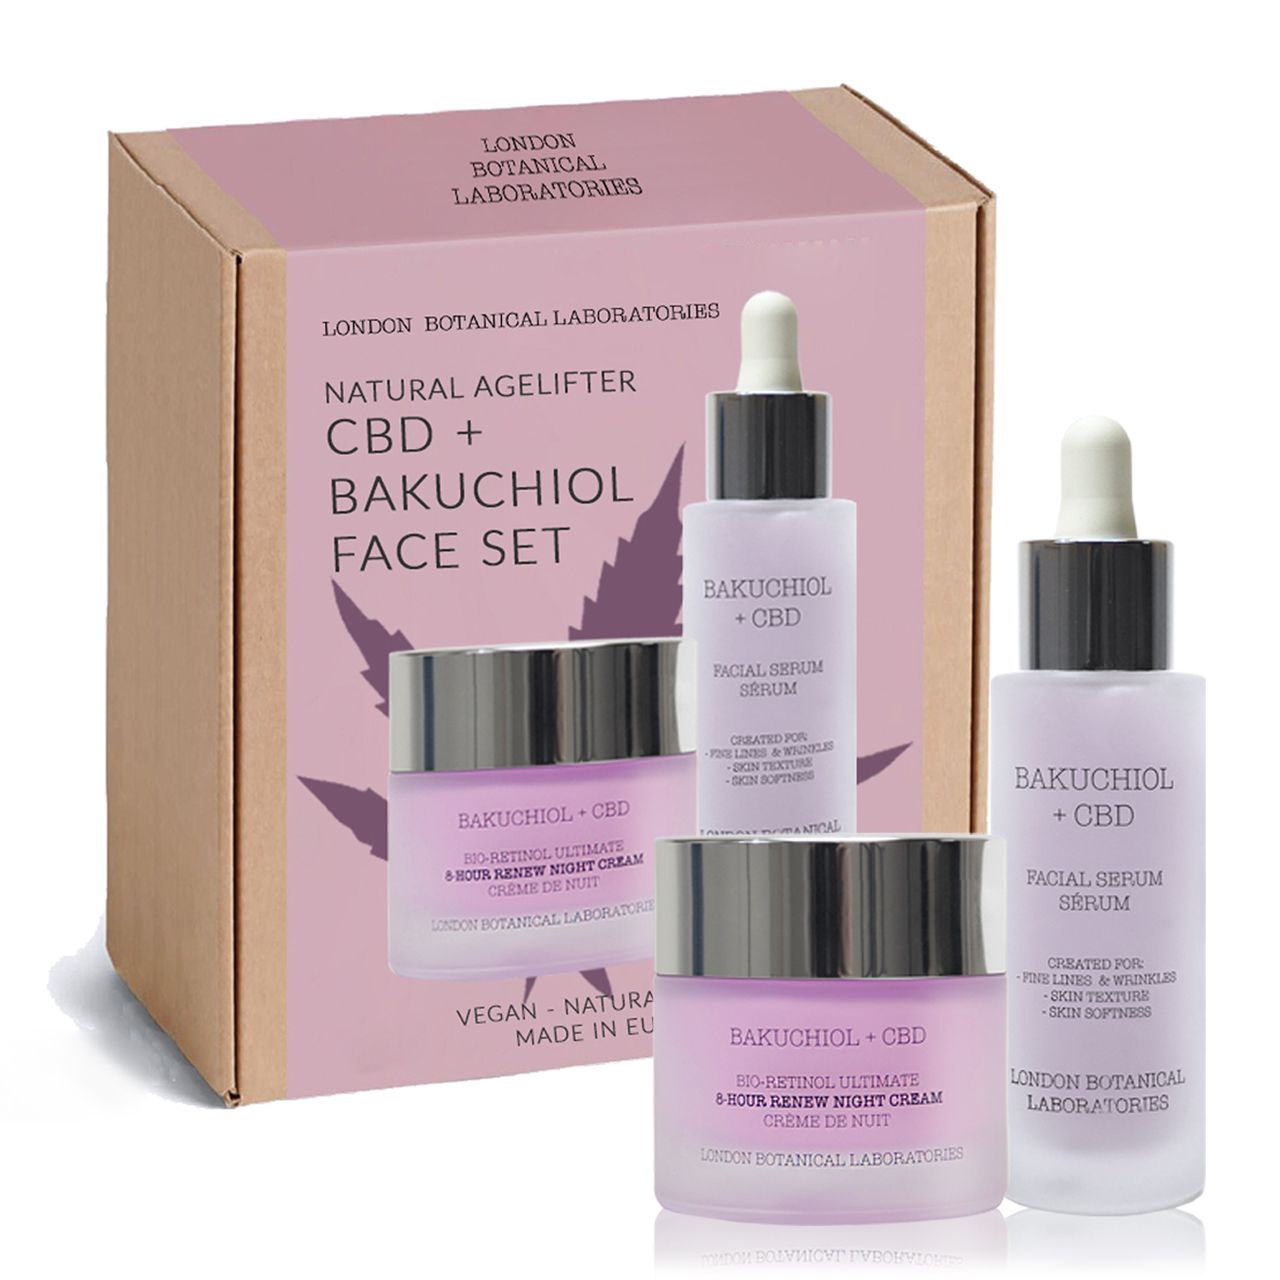 Bakuchiol + CBD Serum 30ml:
Anti-ageing serum with gentle but effective bio-retinol and hyaluronic acid
 Aims to smoothen fine lines and wrinkles in long term use
 Aims to aid in skin’s natural renewal for brighter more even skin tone
 Full of natural anti-oxidants, fruit extracts and oils
 Contains 3 x Plum Extract - Kakadu Plum Extract, Plump Pine Extract, Wild Plum Fruit Extract.
 Contains Bio Retinol called Bakuchiol, Aloe Vera Juice, Magnolia Leaf Extract and Argan Oil
 A breakthrough anti-ageing serum that delivers retinol results without irritation, while enhancing skin vitality and radiance. Deeply hydrating with added Hyaluronic acid, it reduces the appearance of fine line and wrinkles. Powered by three unique plum extract with bio retinol called Bakuchiol makes this cream totally unique in the market.

Bakuchiol + CBD |  Cream 50ml:
Anti-ageing cream with gentle but effective bio-retinol.
 Aims to smoothen fine lines and wrinkles in long term use.
 Aims to aid in skin’s natural renewal for brighter more even skin tone.
 Full of natural anti-oxidants and skin softening oils.
 Contains 3 x Plum Extract - Kakadu Plum Extract, Plump Pine Extract, Wild Plum Fruit Extract.
 Contains Bio Retinol called Bakuchiol, White Willow bark extract, Grape Seed Oil and Aloe Vera Juice.
 A breakthrough anti-ageing cream that delivers retinol results without irritation, while enhancing skin vitality and radiance. Deeply nourishing and hydrating, it reduces the appearance of fine line and wrinkles. Powered by three unique plum extract with bio retinol called Bakuchiol makes this cream totally unique in the market.